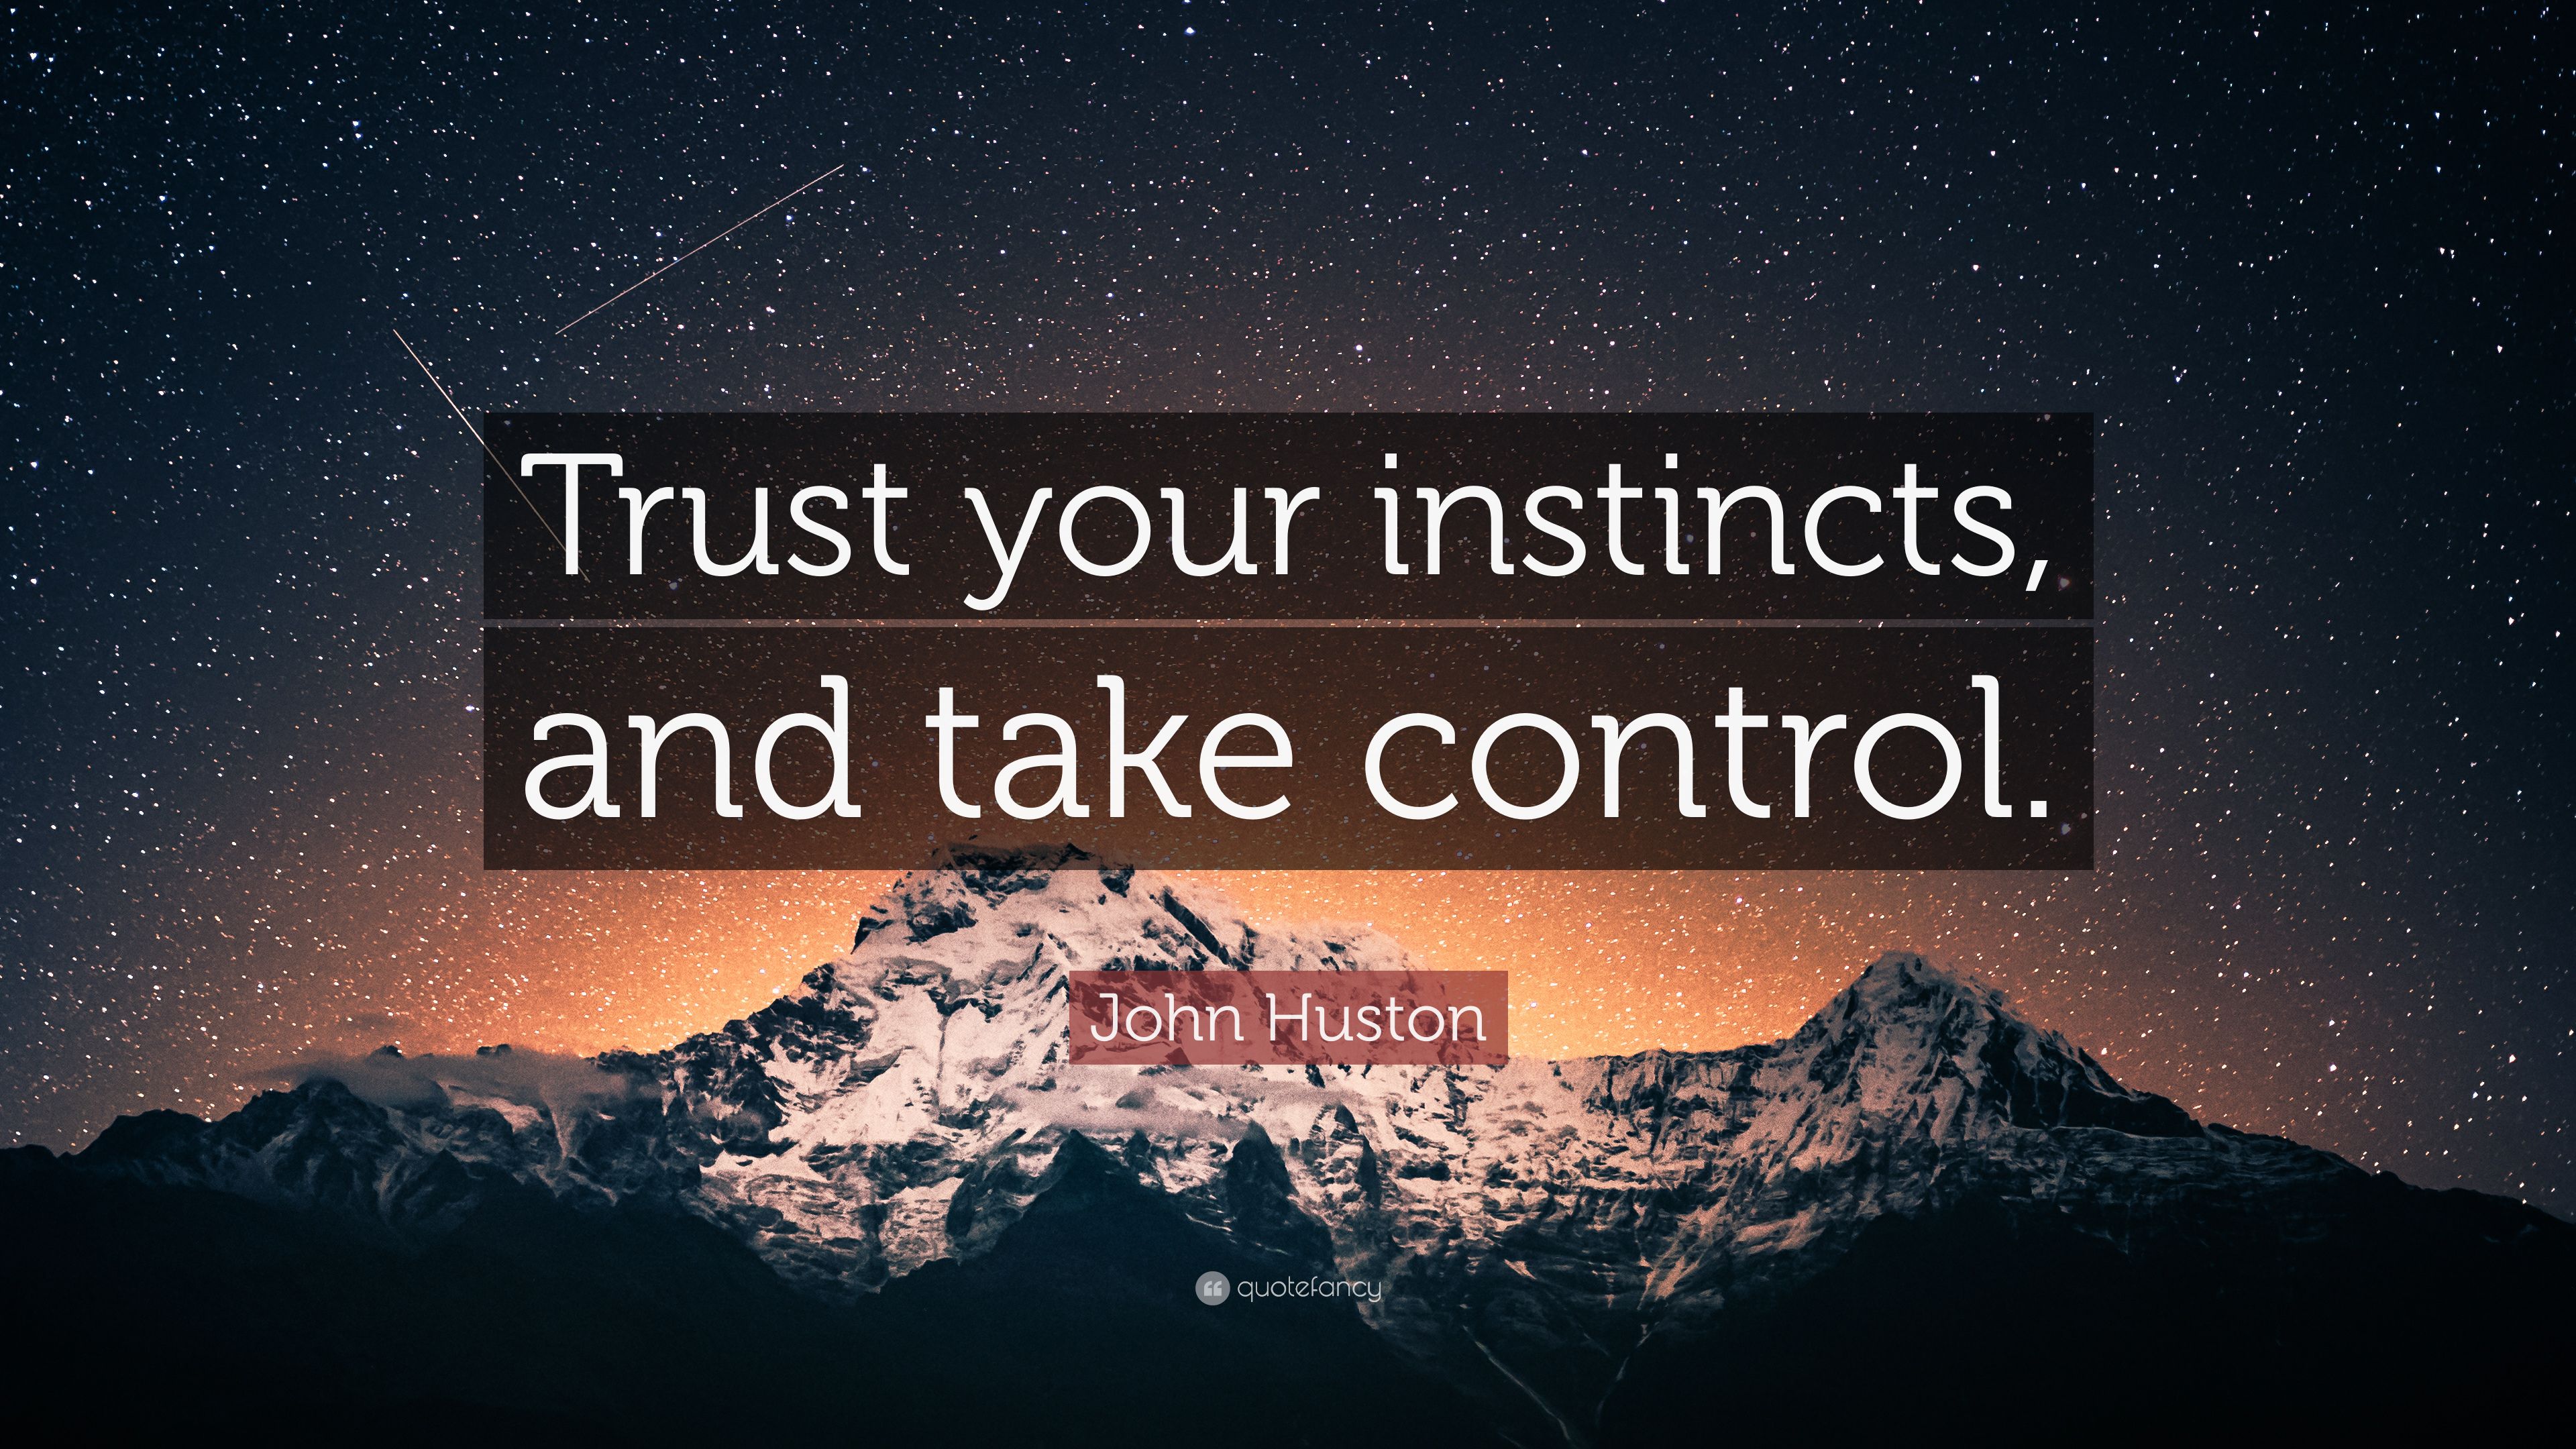 John Huston Quote: “Trust your instincts, and take control.” 9